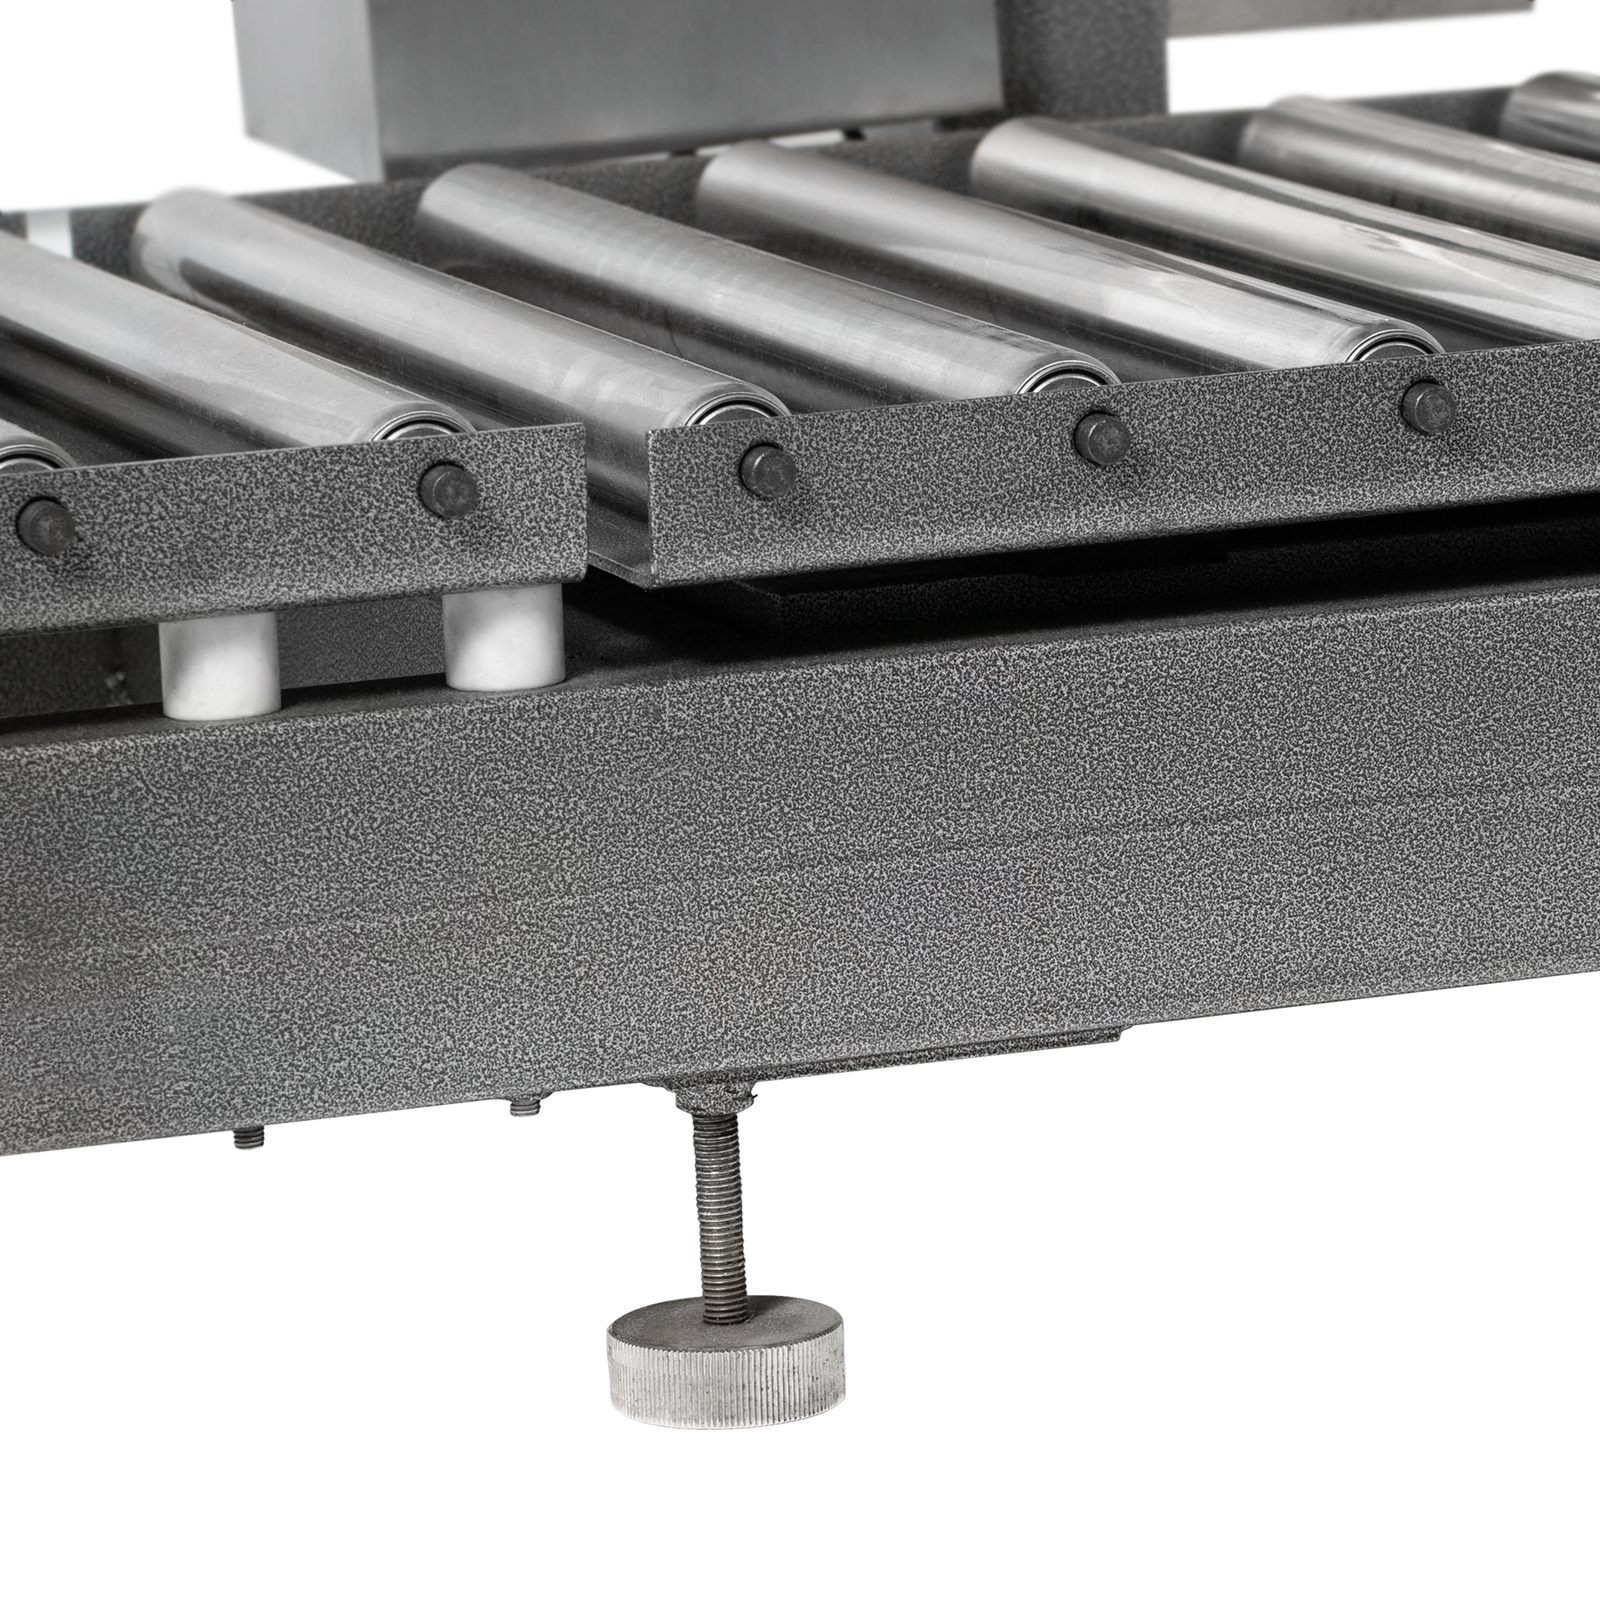 Closeup of the stainless steel rollers of the heavy duty conveyor and the height adjustable feet of the liquid net weight filler